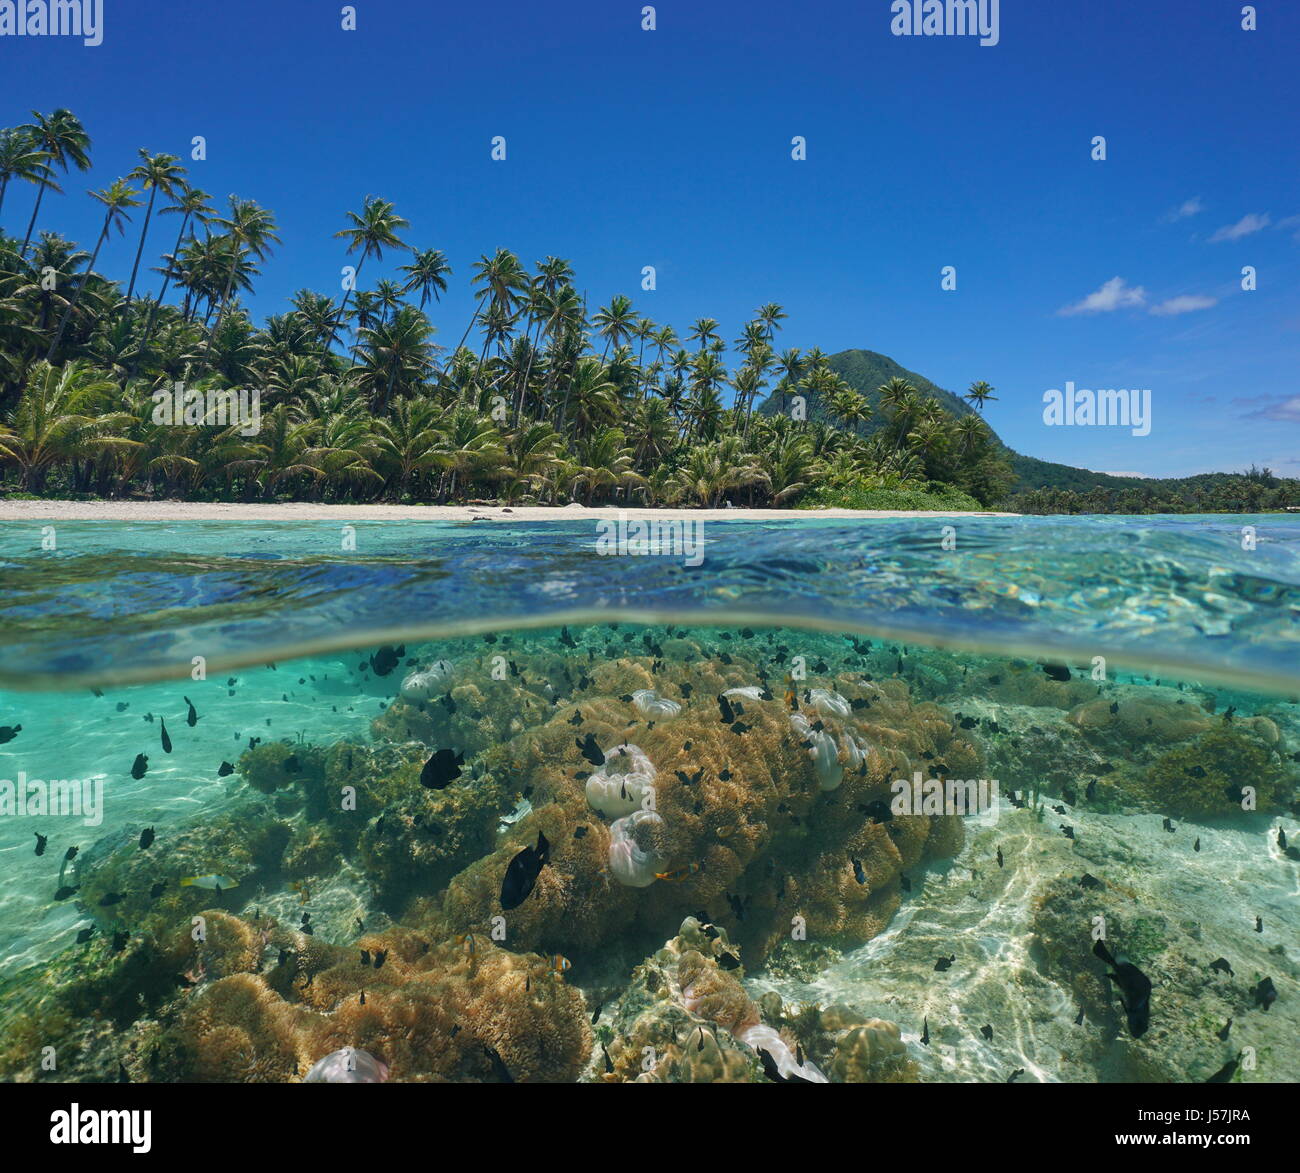 Over under sea surface in the lagoon near the shore of an island with coconut trees and sea anemones with tropical fish underwater, French Polynesia Stock Photo